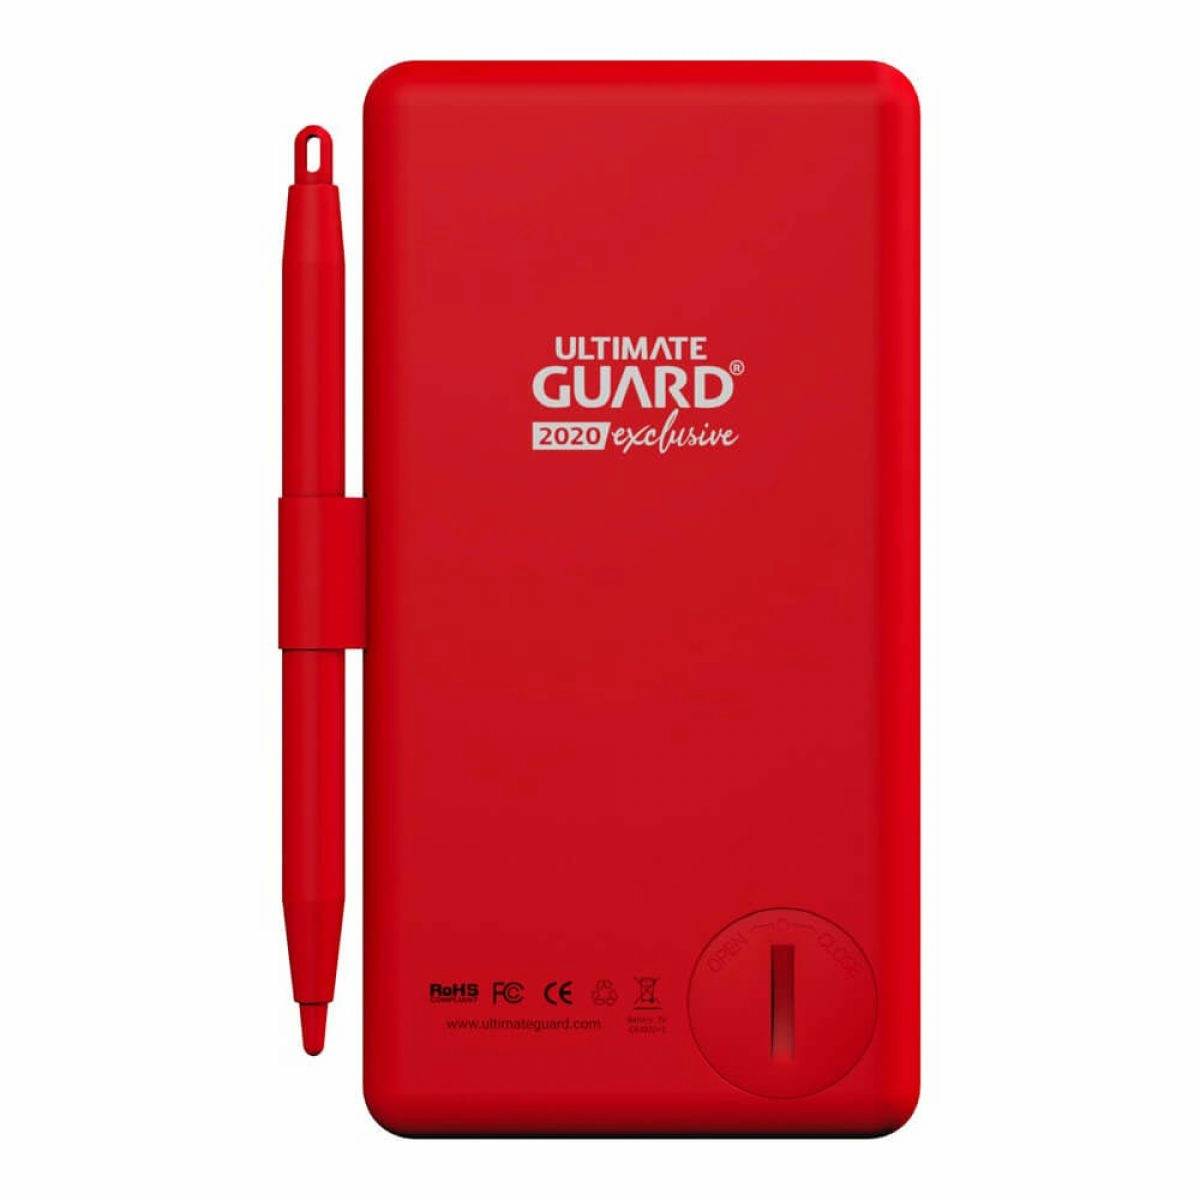 Ultimate Guard 2020 Exclusive Life Pad 5